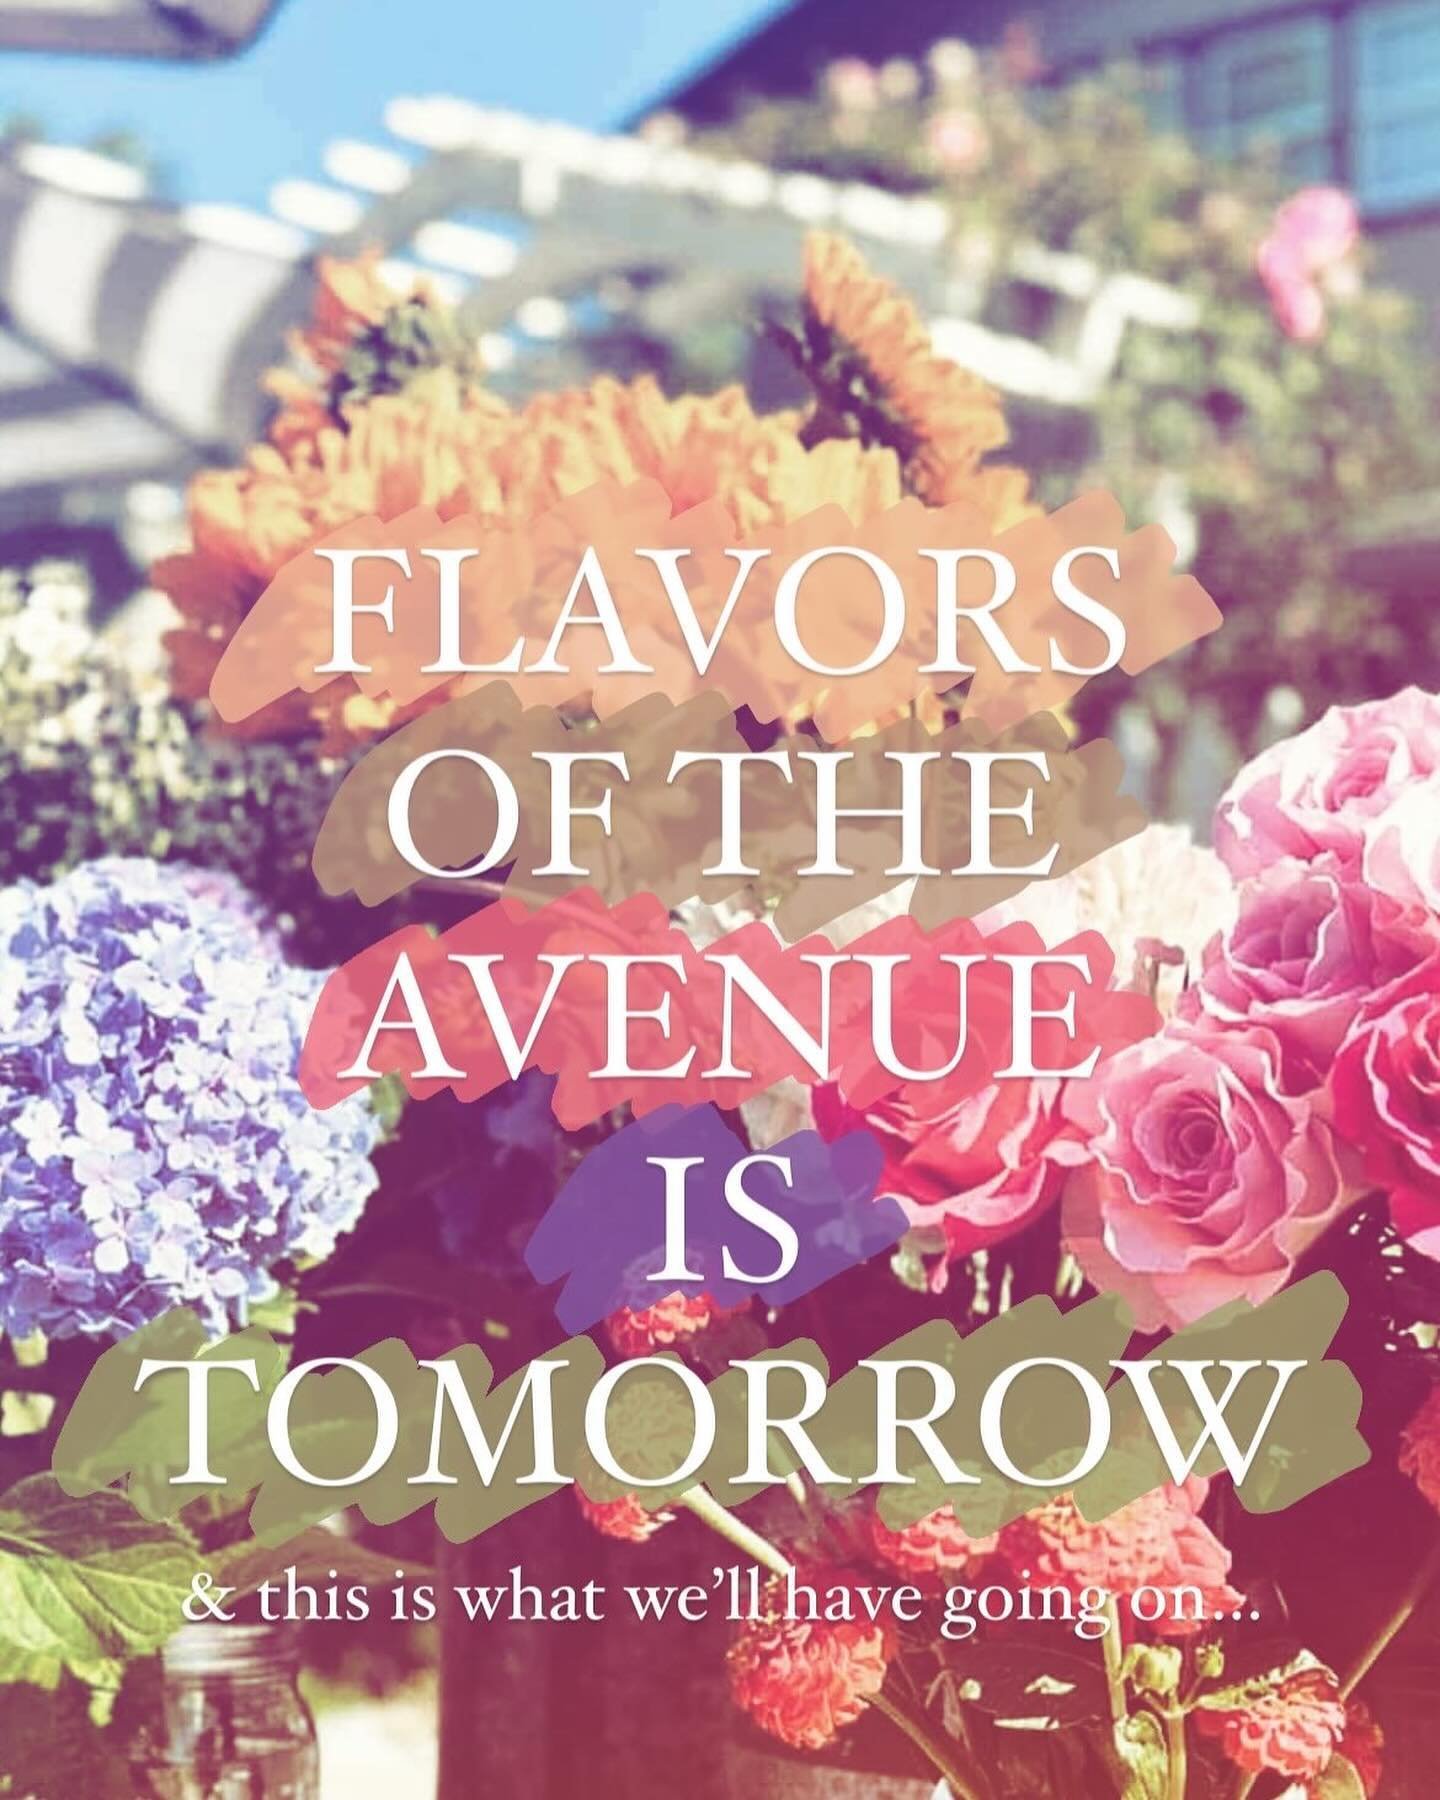 ❕🌷FLAVORS ON THE AVE 🌷❕stop by for tulip and eucalyptus bunches, mini floral bundles and well as our entire flower bar! make your own bouquet or grab a premade one!

&amp; last but definitely not least- 30% off our entire gift shop (all non-floral 